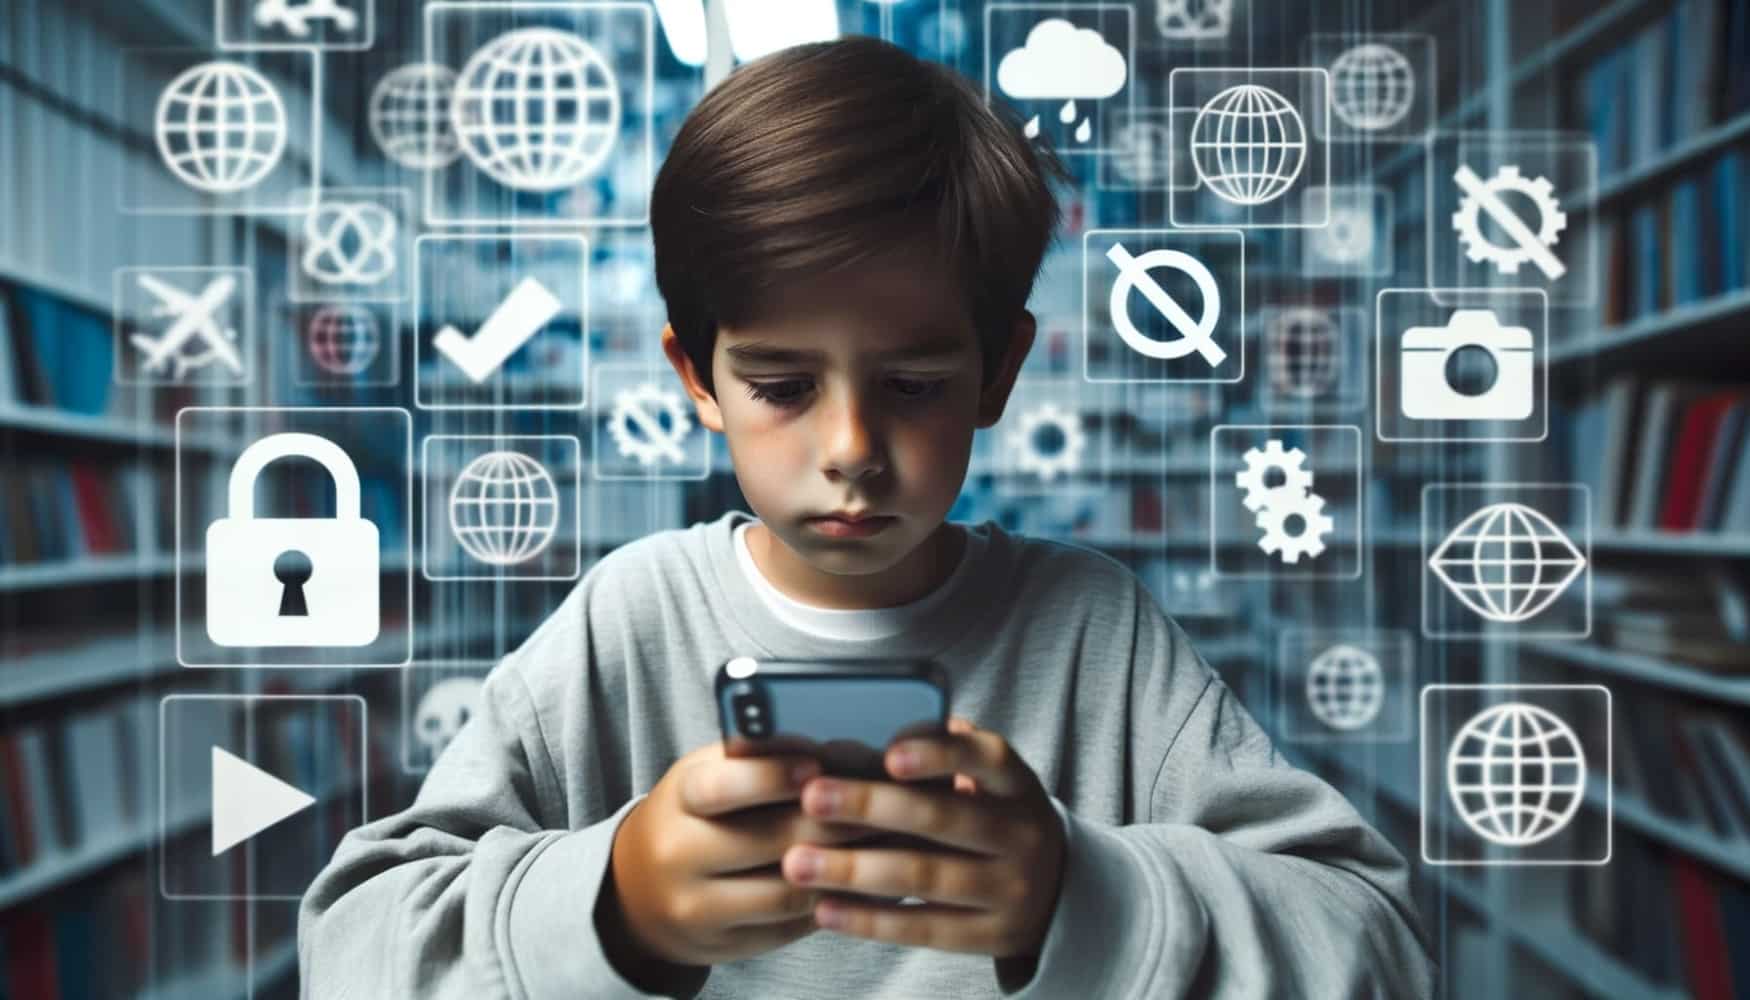 Photo of a young boy intently looking at an iPhone he's holding in his hands. Behind him, a translucent digital wall displays various website logos, some of which have a crossed-out sign, indicating they are blocked.